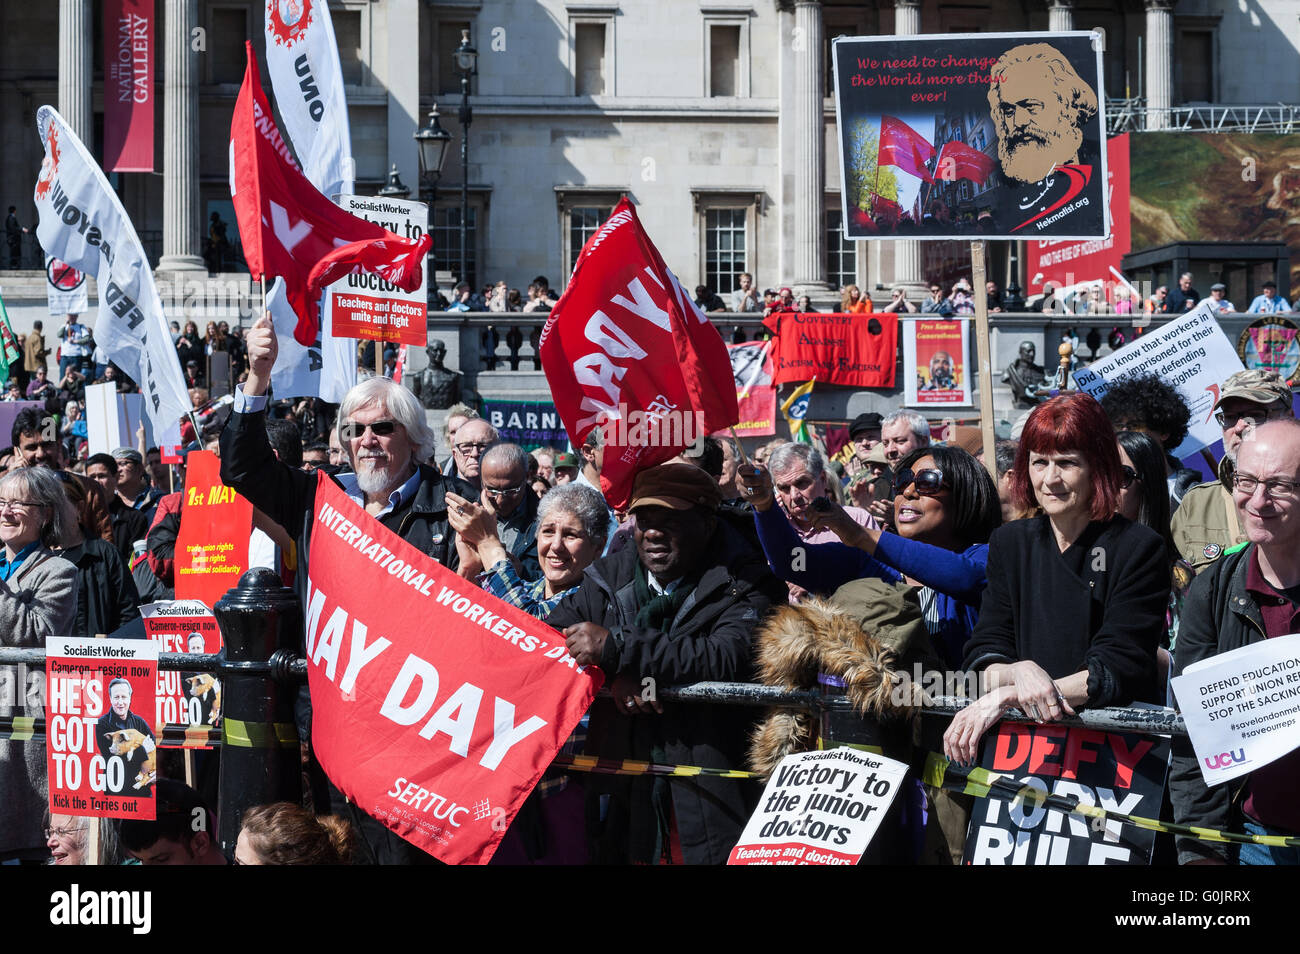 London, UK. 1st May 2016. Workers and trade unions' activists from Britain and around the world gathered at a rally in Trafalgar Square to mark the annual May Day, also know as Labour Day. Unionists and campaigners called for an end to austerity, standing up for human rights and international solidarity in the fight for trade unions' rights. Wiktor Szymanowicz/Alamy Live News Stock Photo